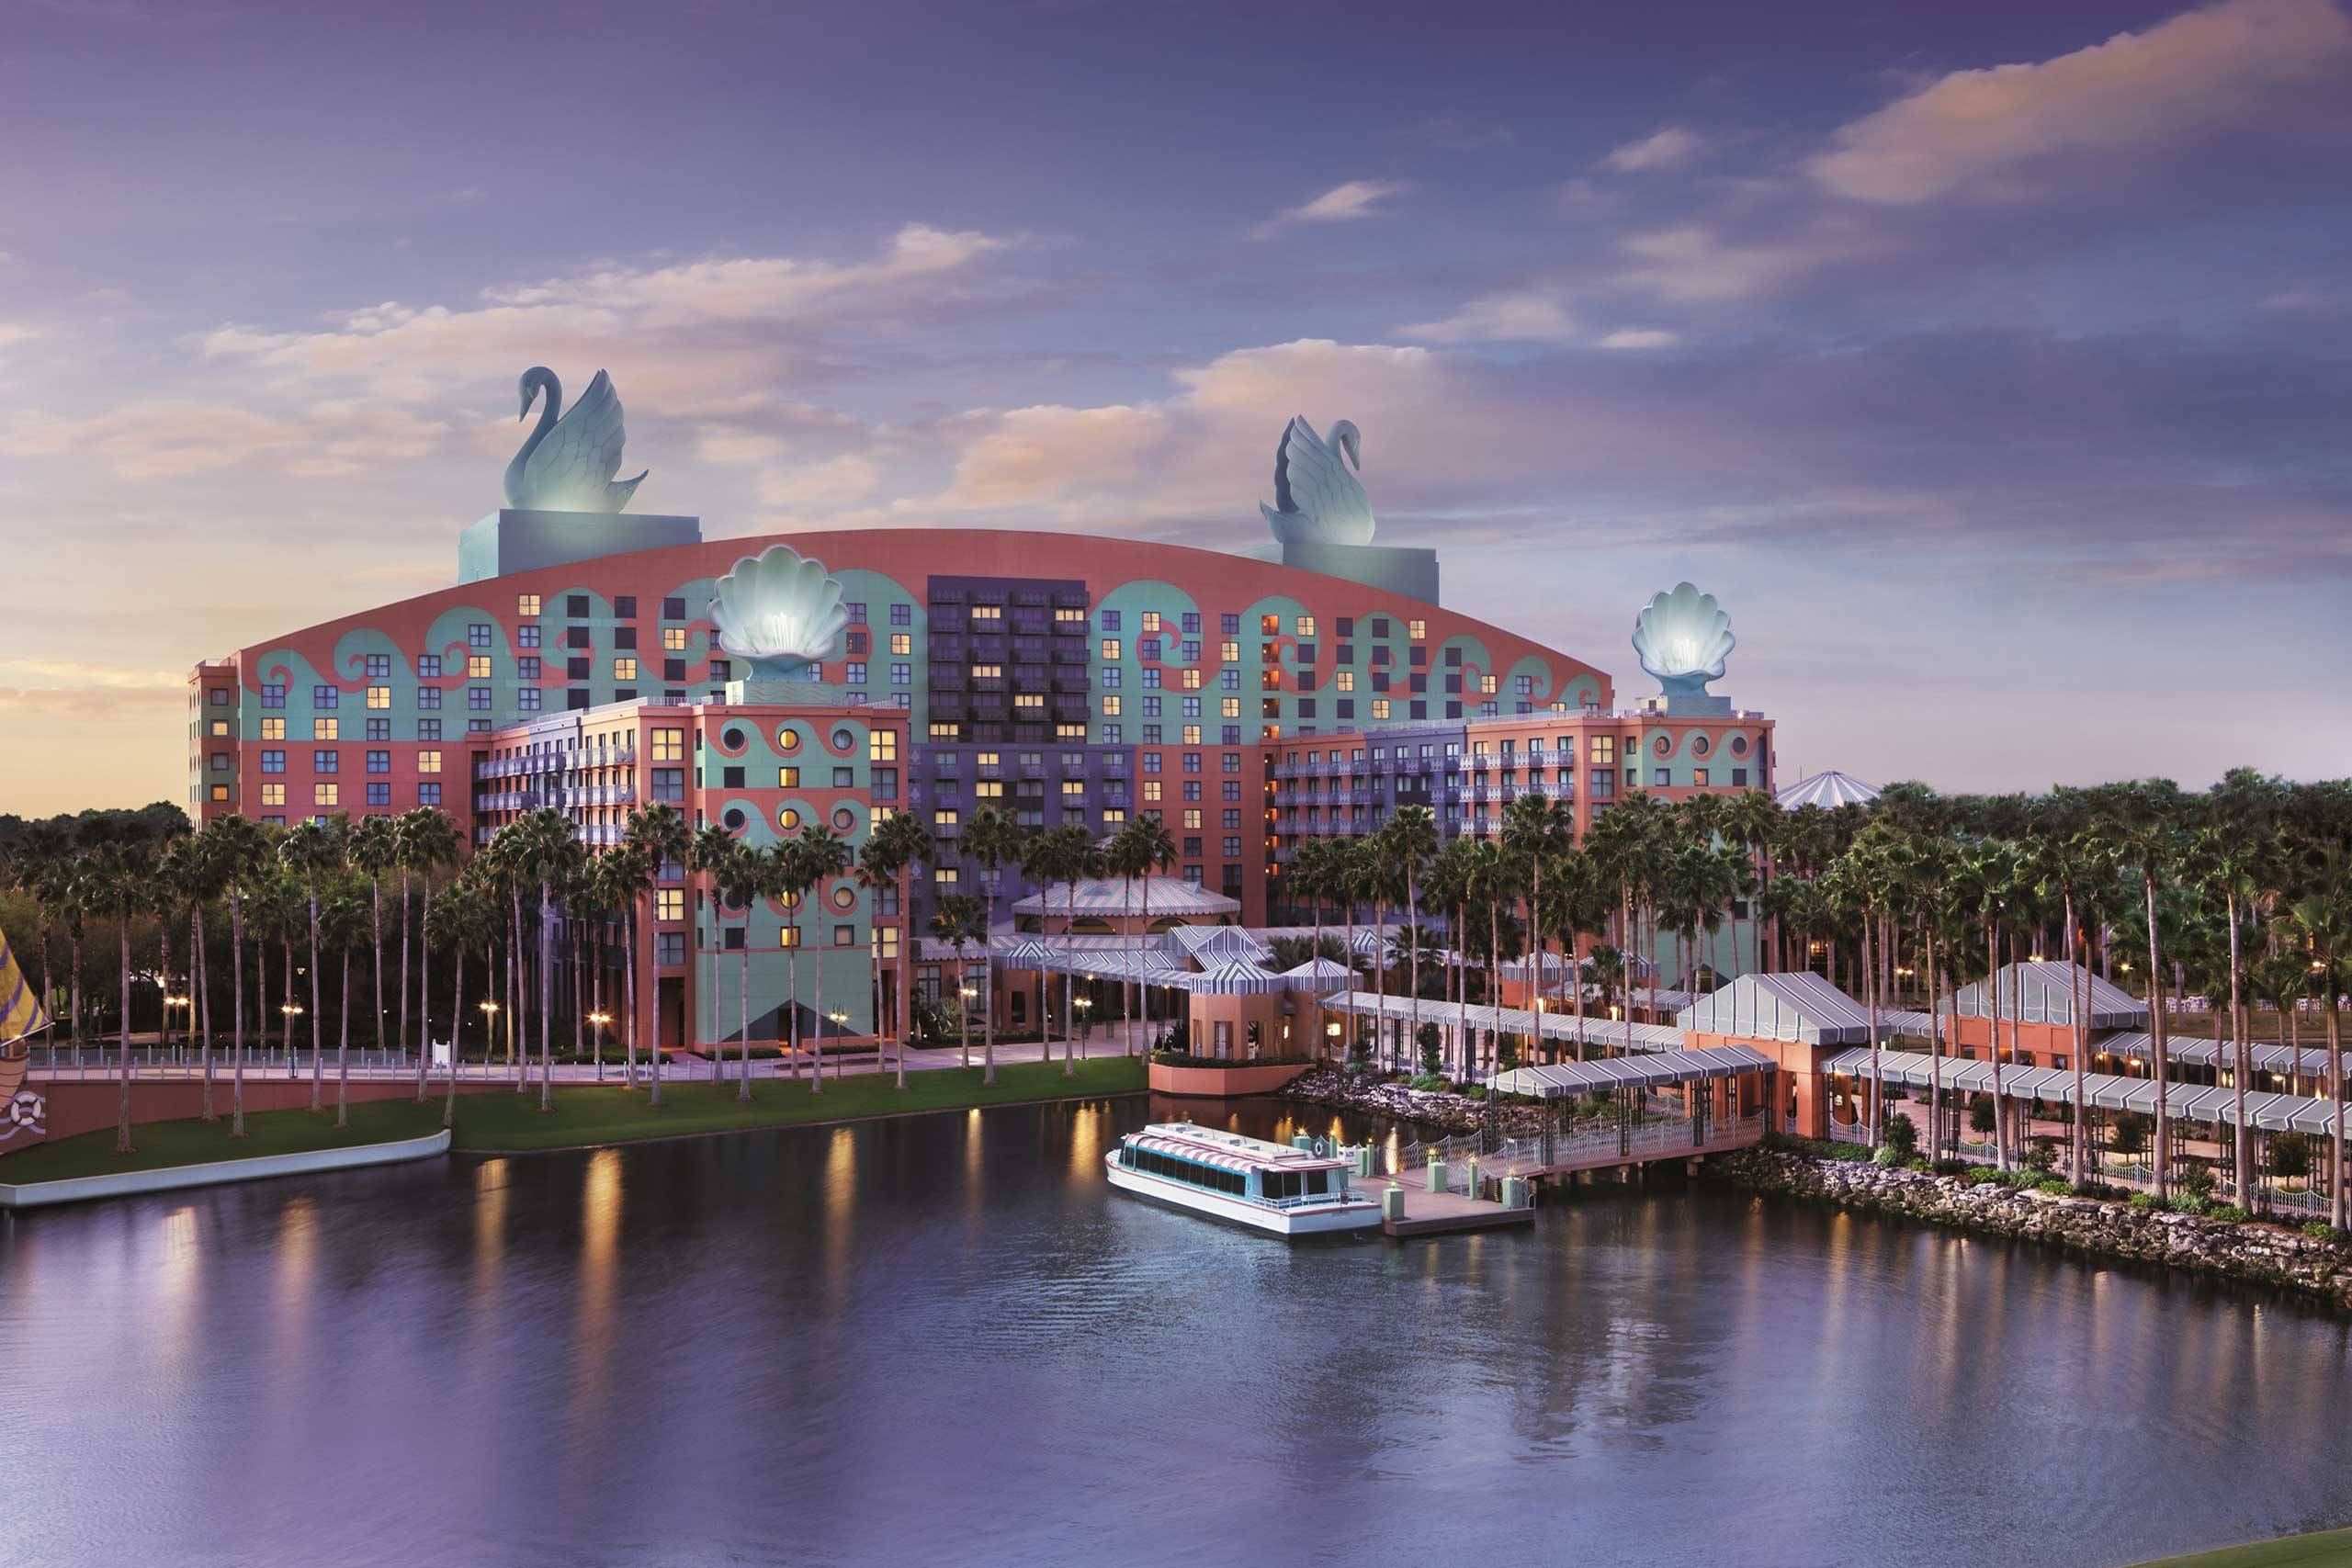 Food and Beverage Lovers, Unite! The Walt Disney World Swan and Dolphin Food and Wine Classic returns for its second year